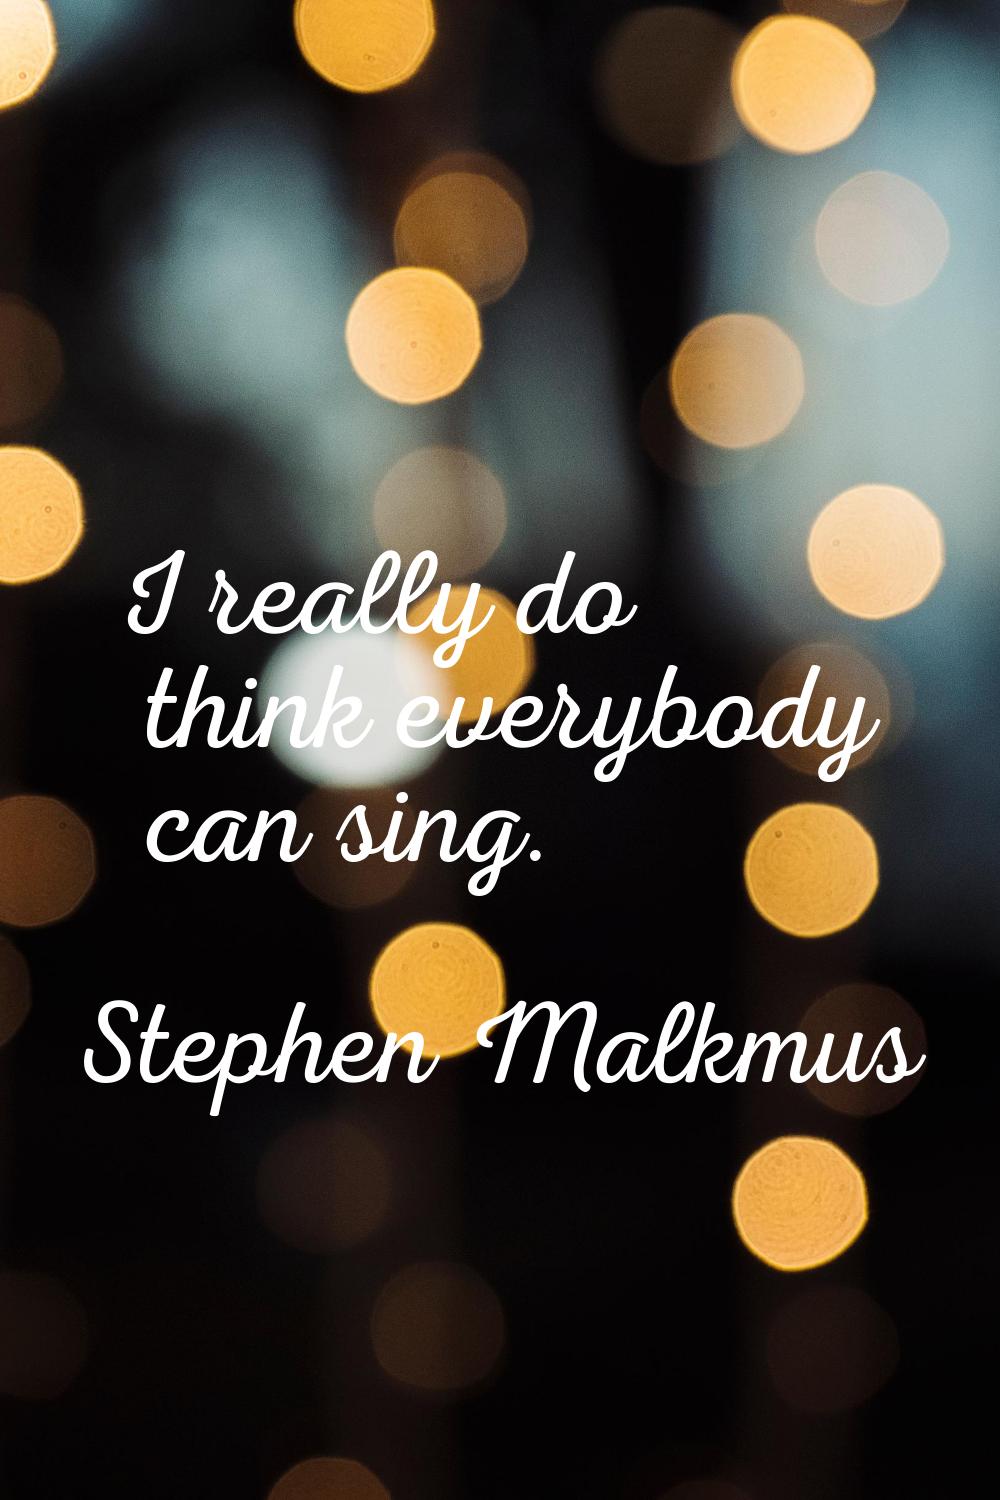 I really do think everybody can sing.